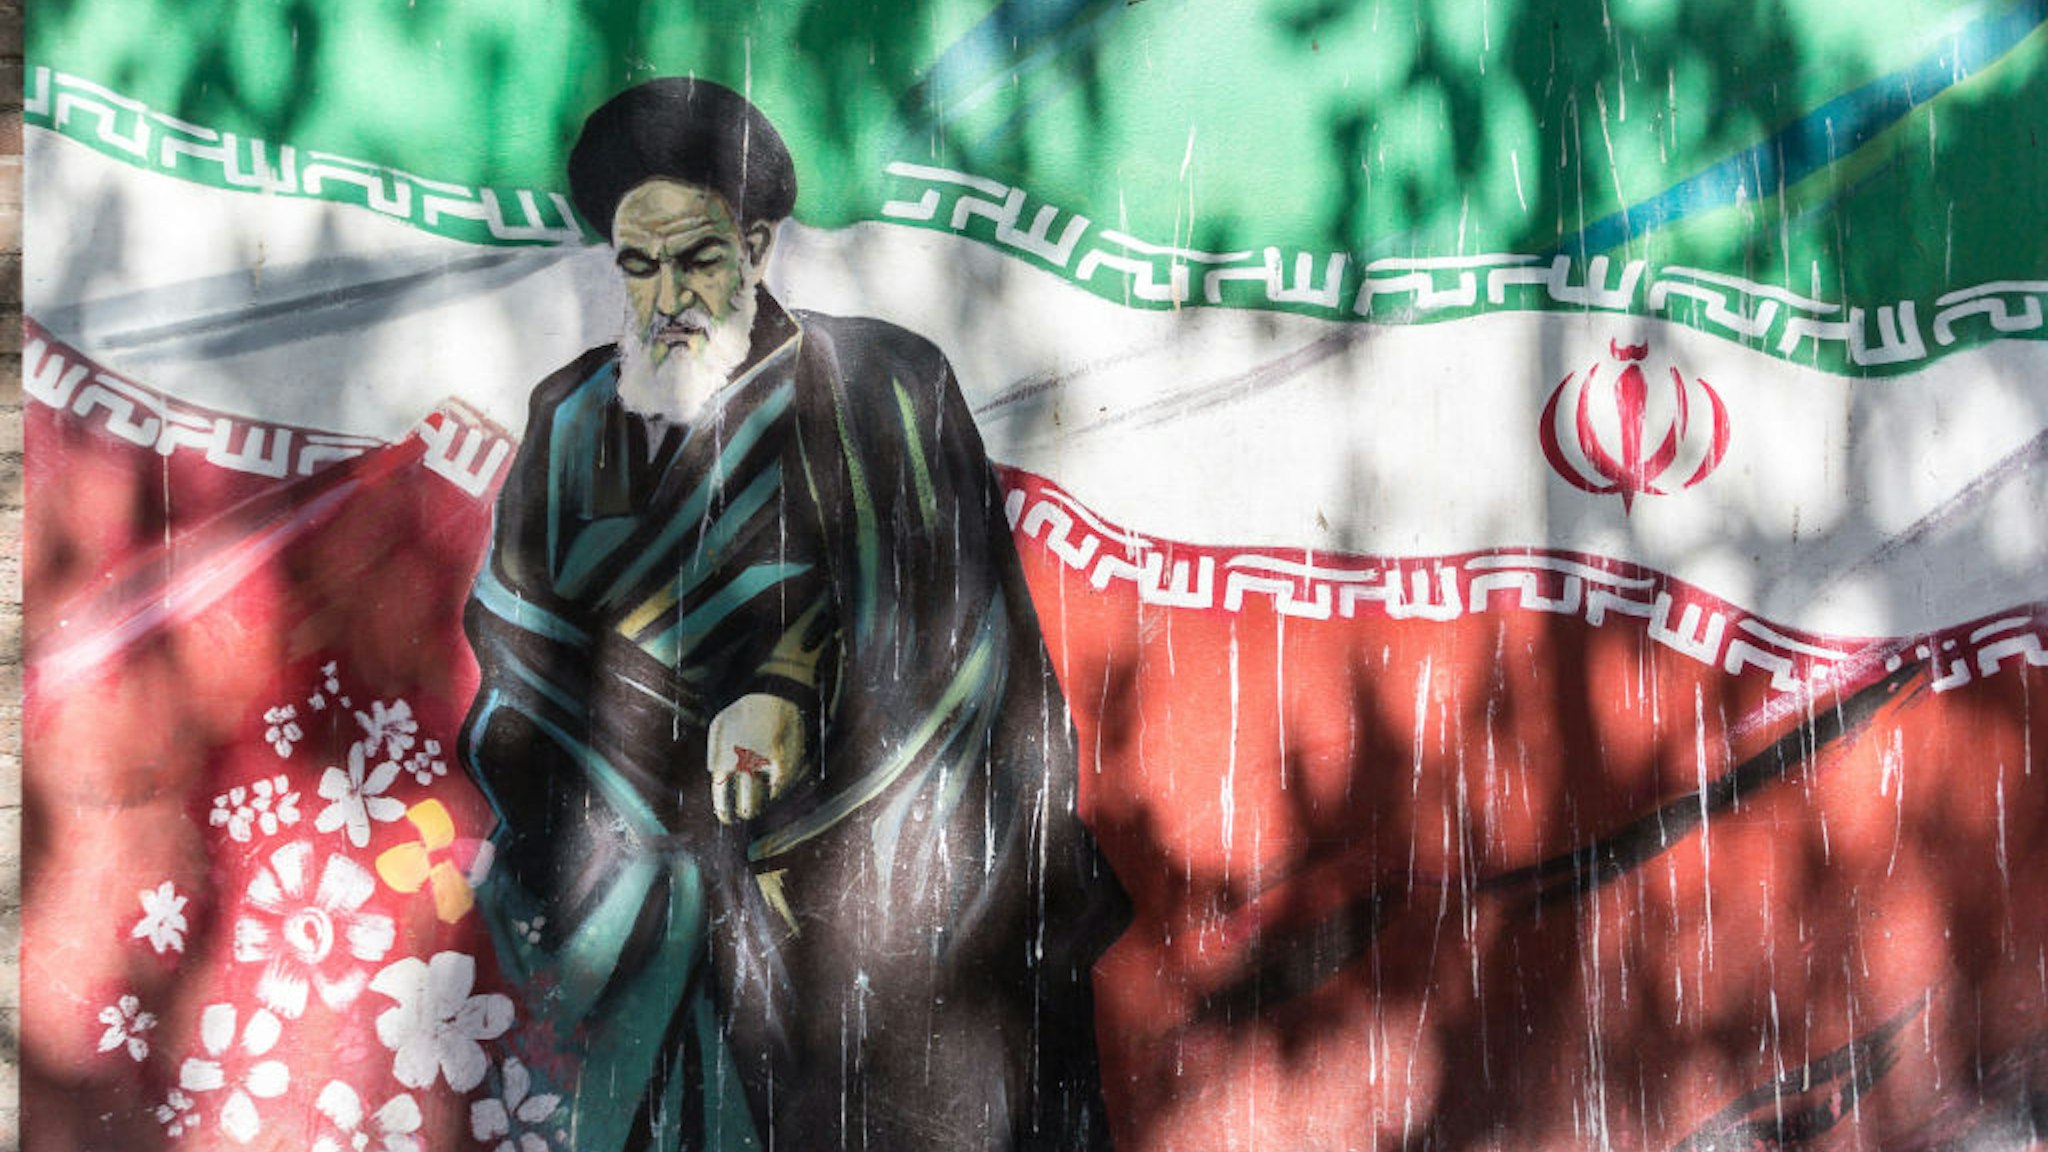 Revolutionary graffiti of Ruhollah Khomeini, the first post revolution Ayatollah with Iranian flag as a background on Taleqani Street in Tehran, the capital of Islamic Republic of Iran on September 27, 2018.